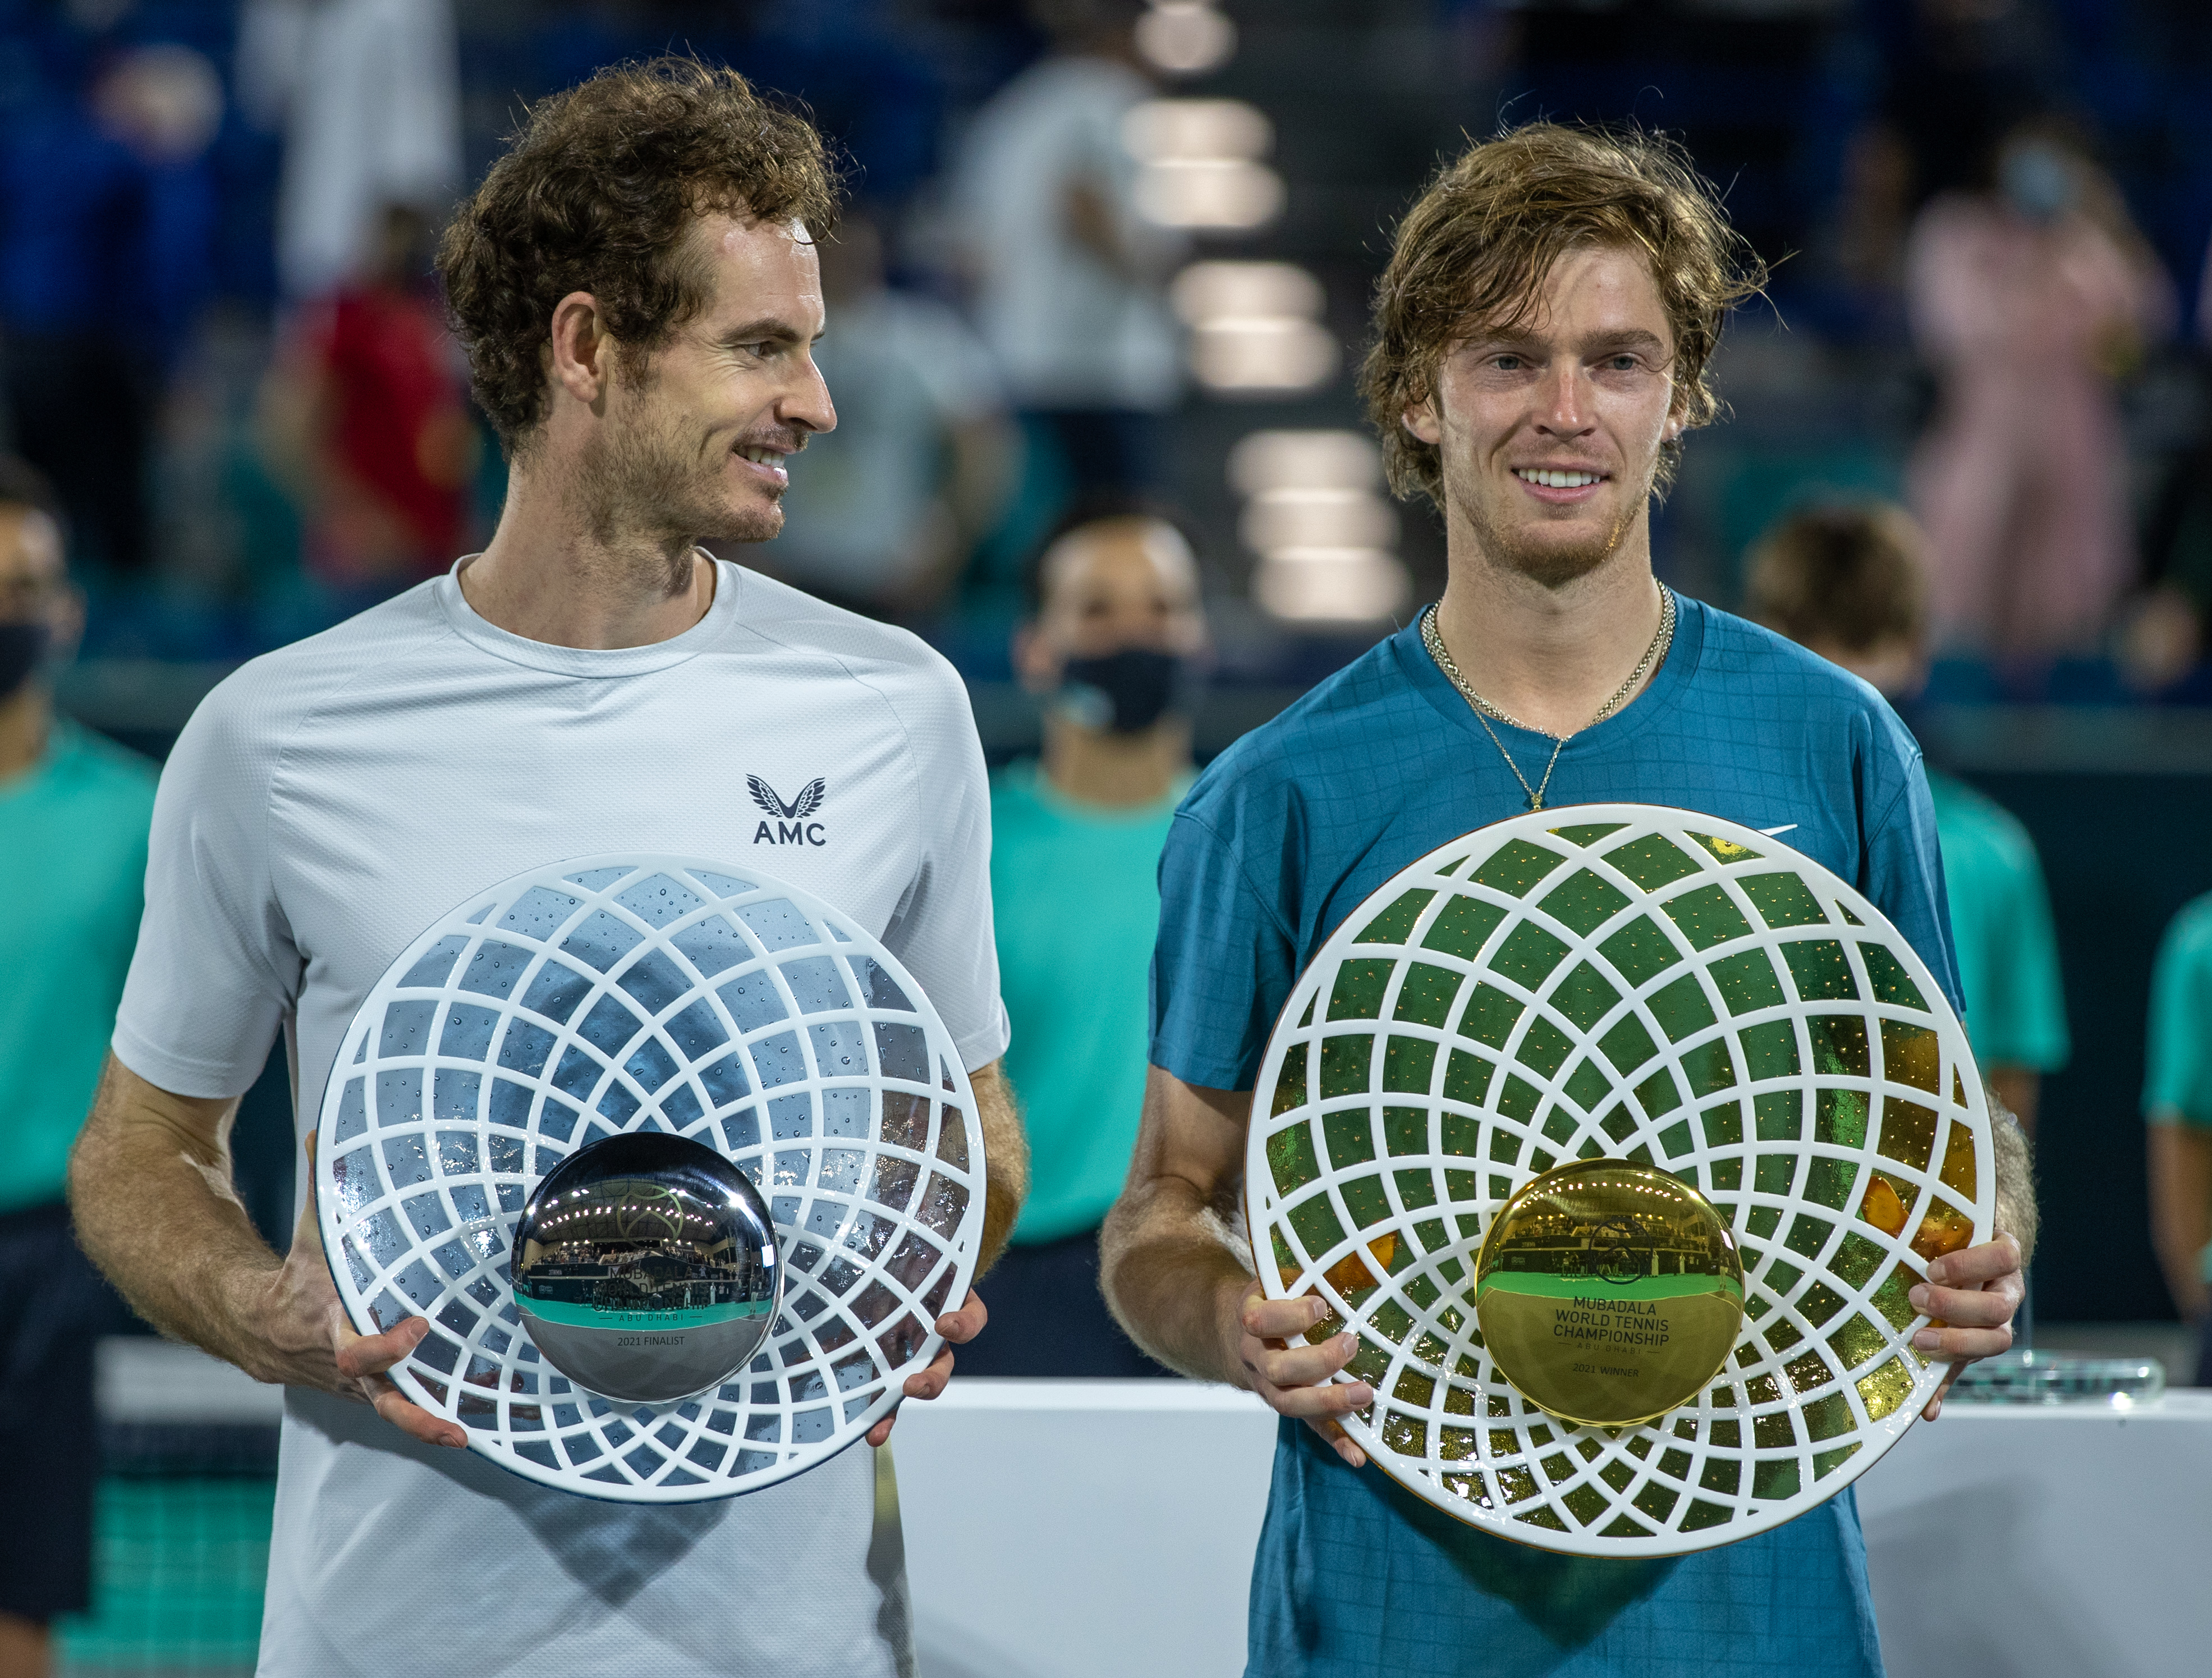 Andrey Rublev lifts Mubadala World Tennis Championship title after win over Andy Murray